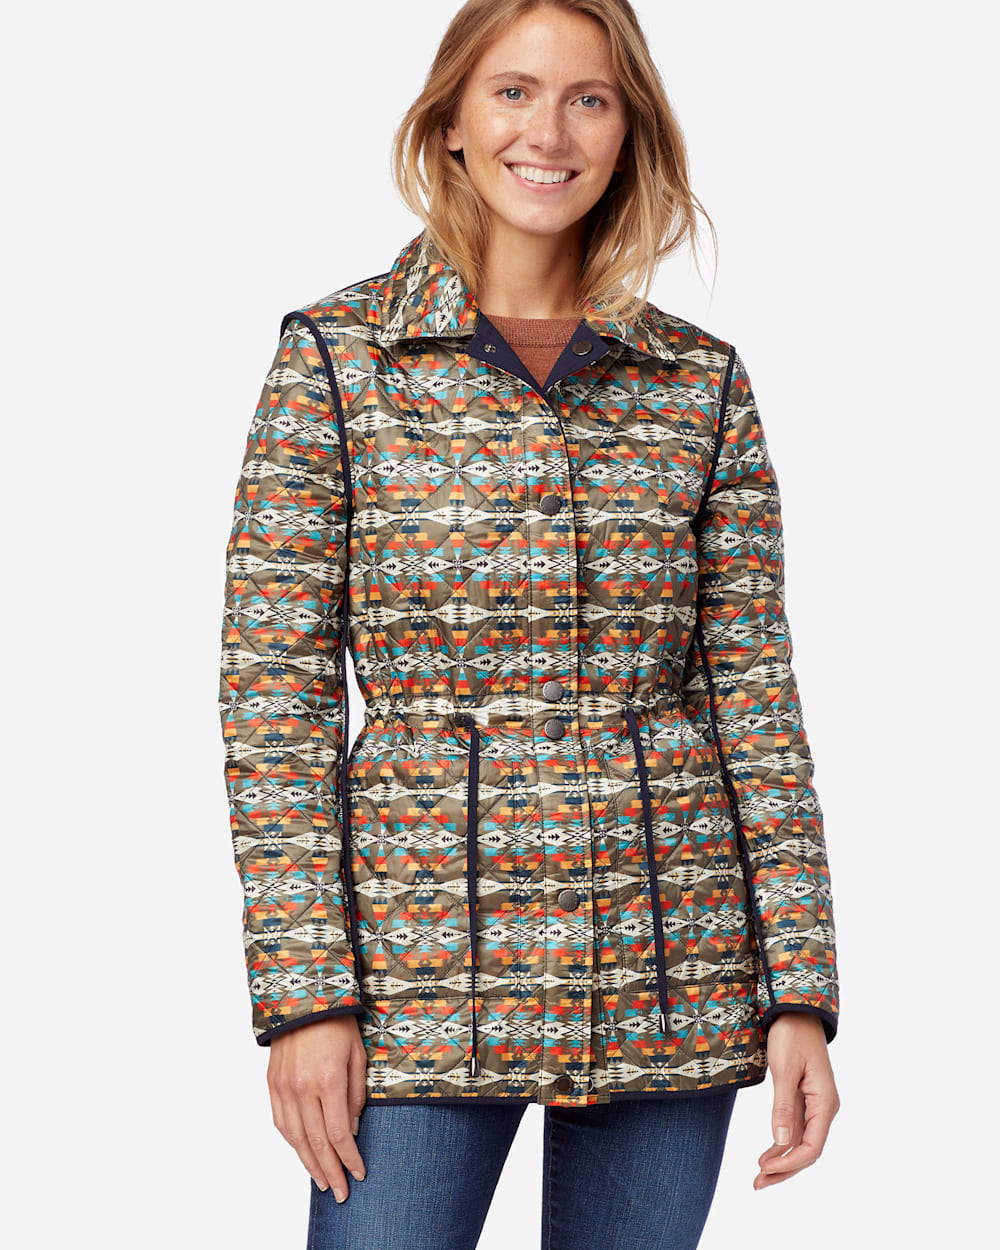 WOMEN'S MEADOW REVERSIBLE QUILTED JACKET image number 1